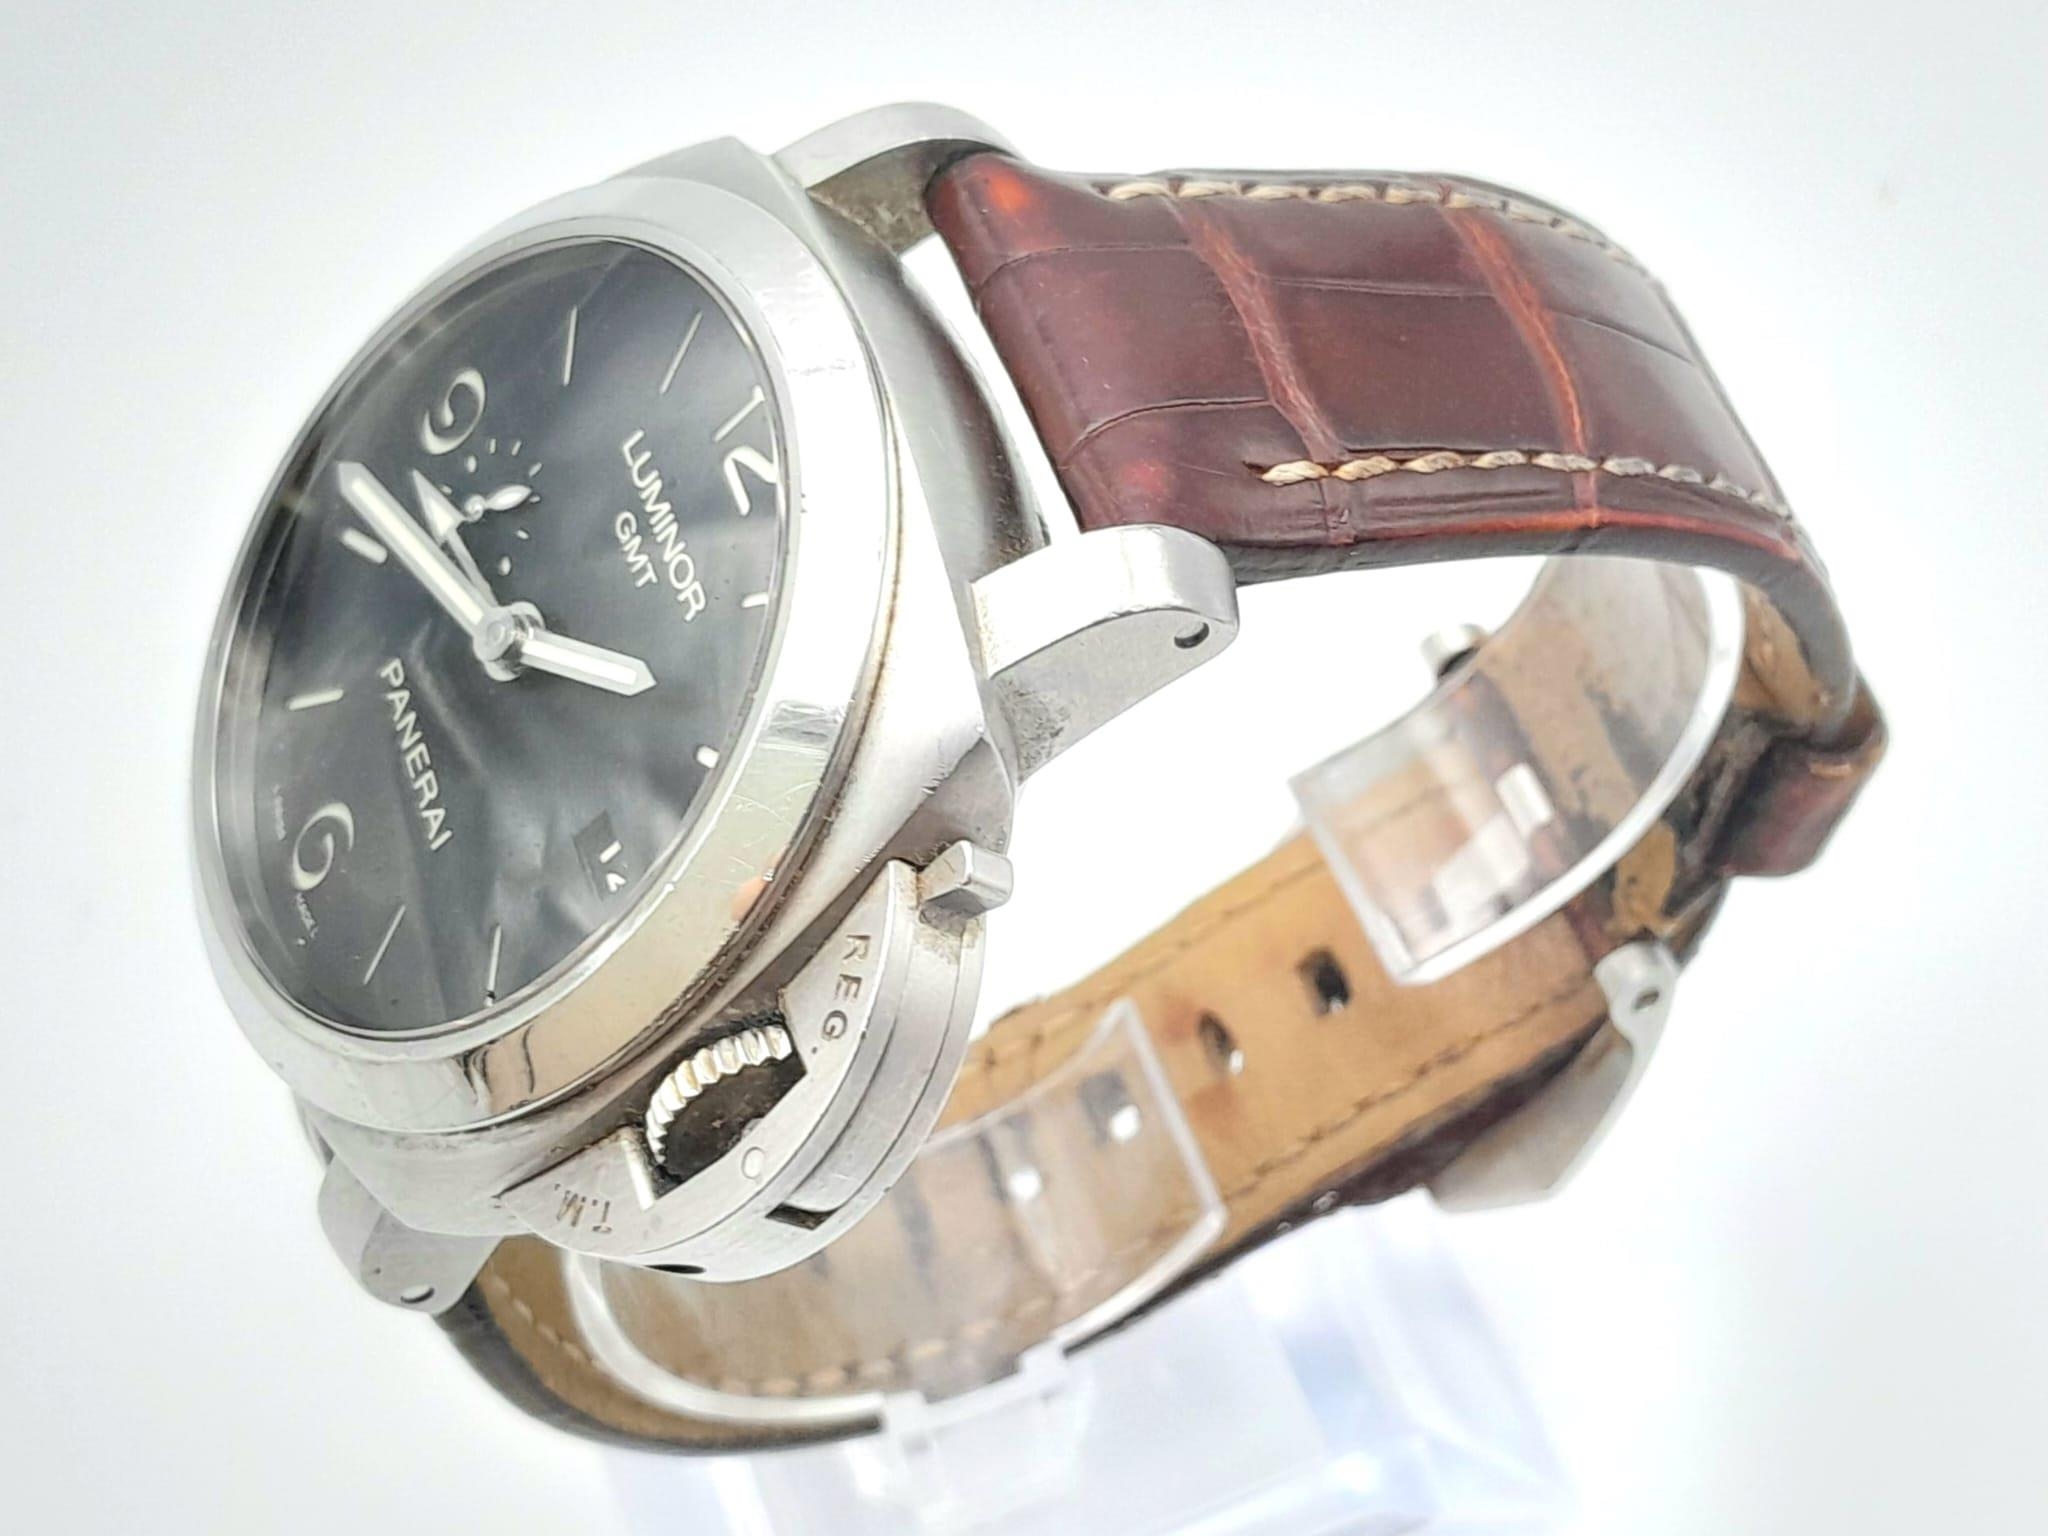 A "PANERAI LUMINOR GMT" WITH SKELETON BACK IN STAINLESS STEEL, A VERY SOUGHT AFTER PRESTIGE WATCH! - Image 2 of 11